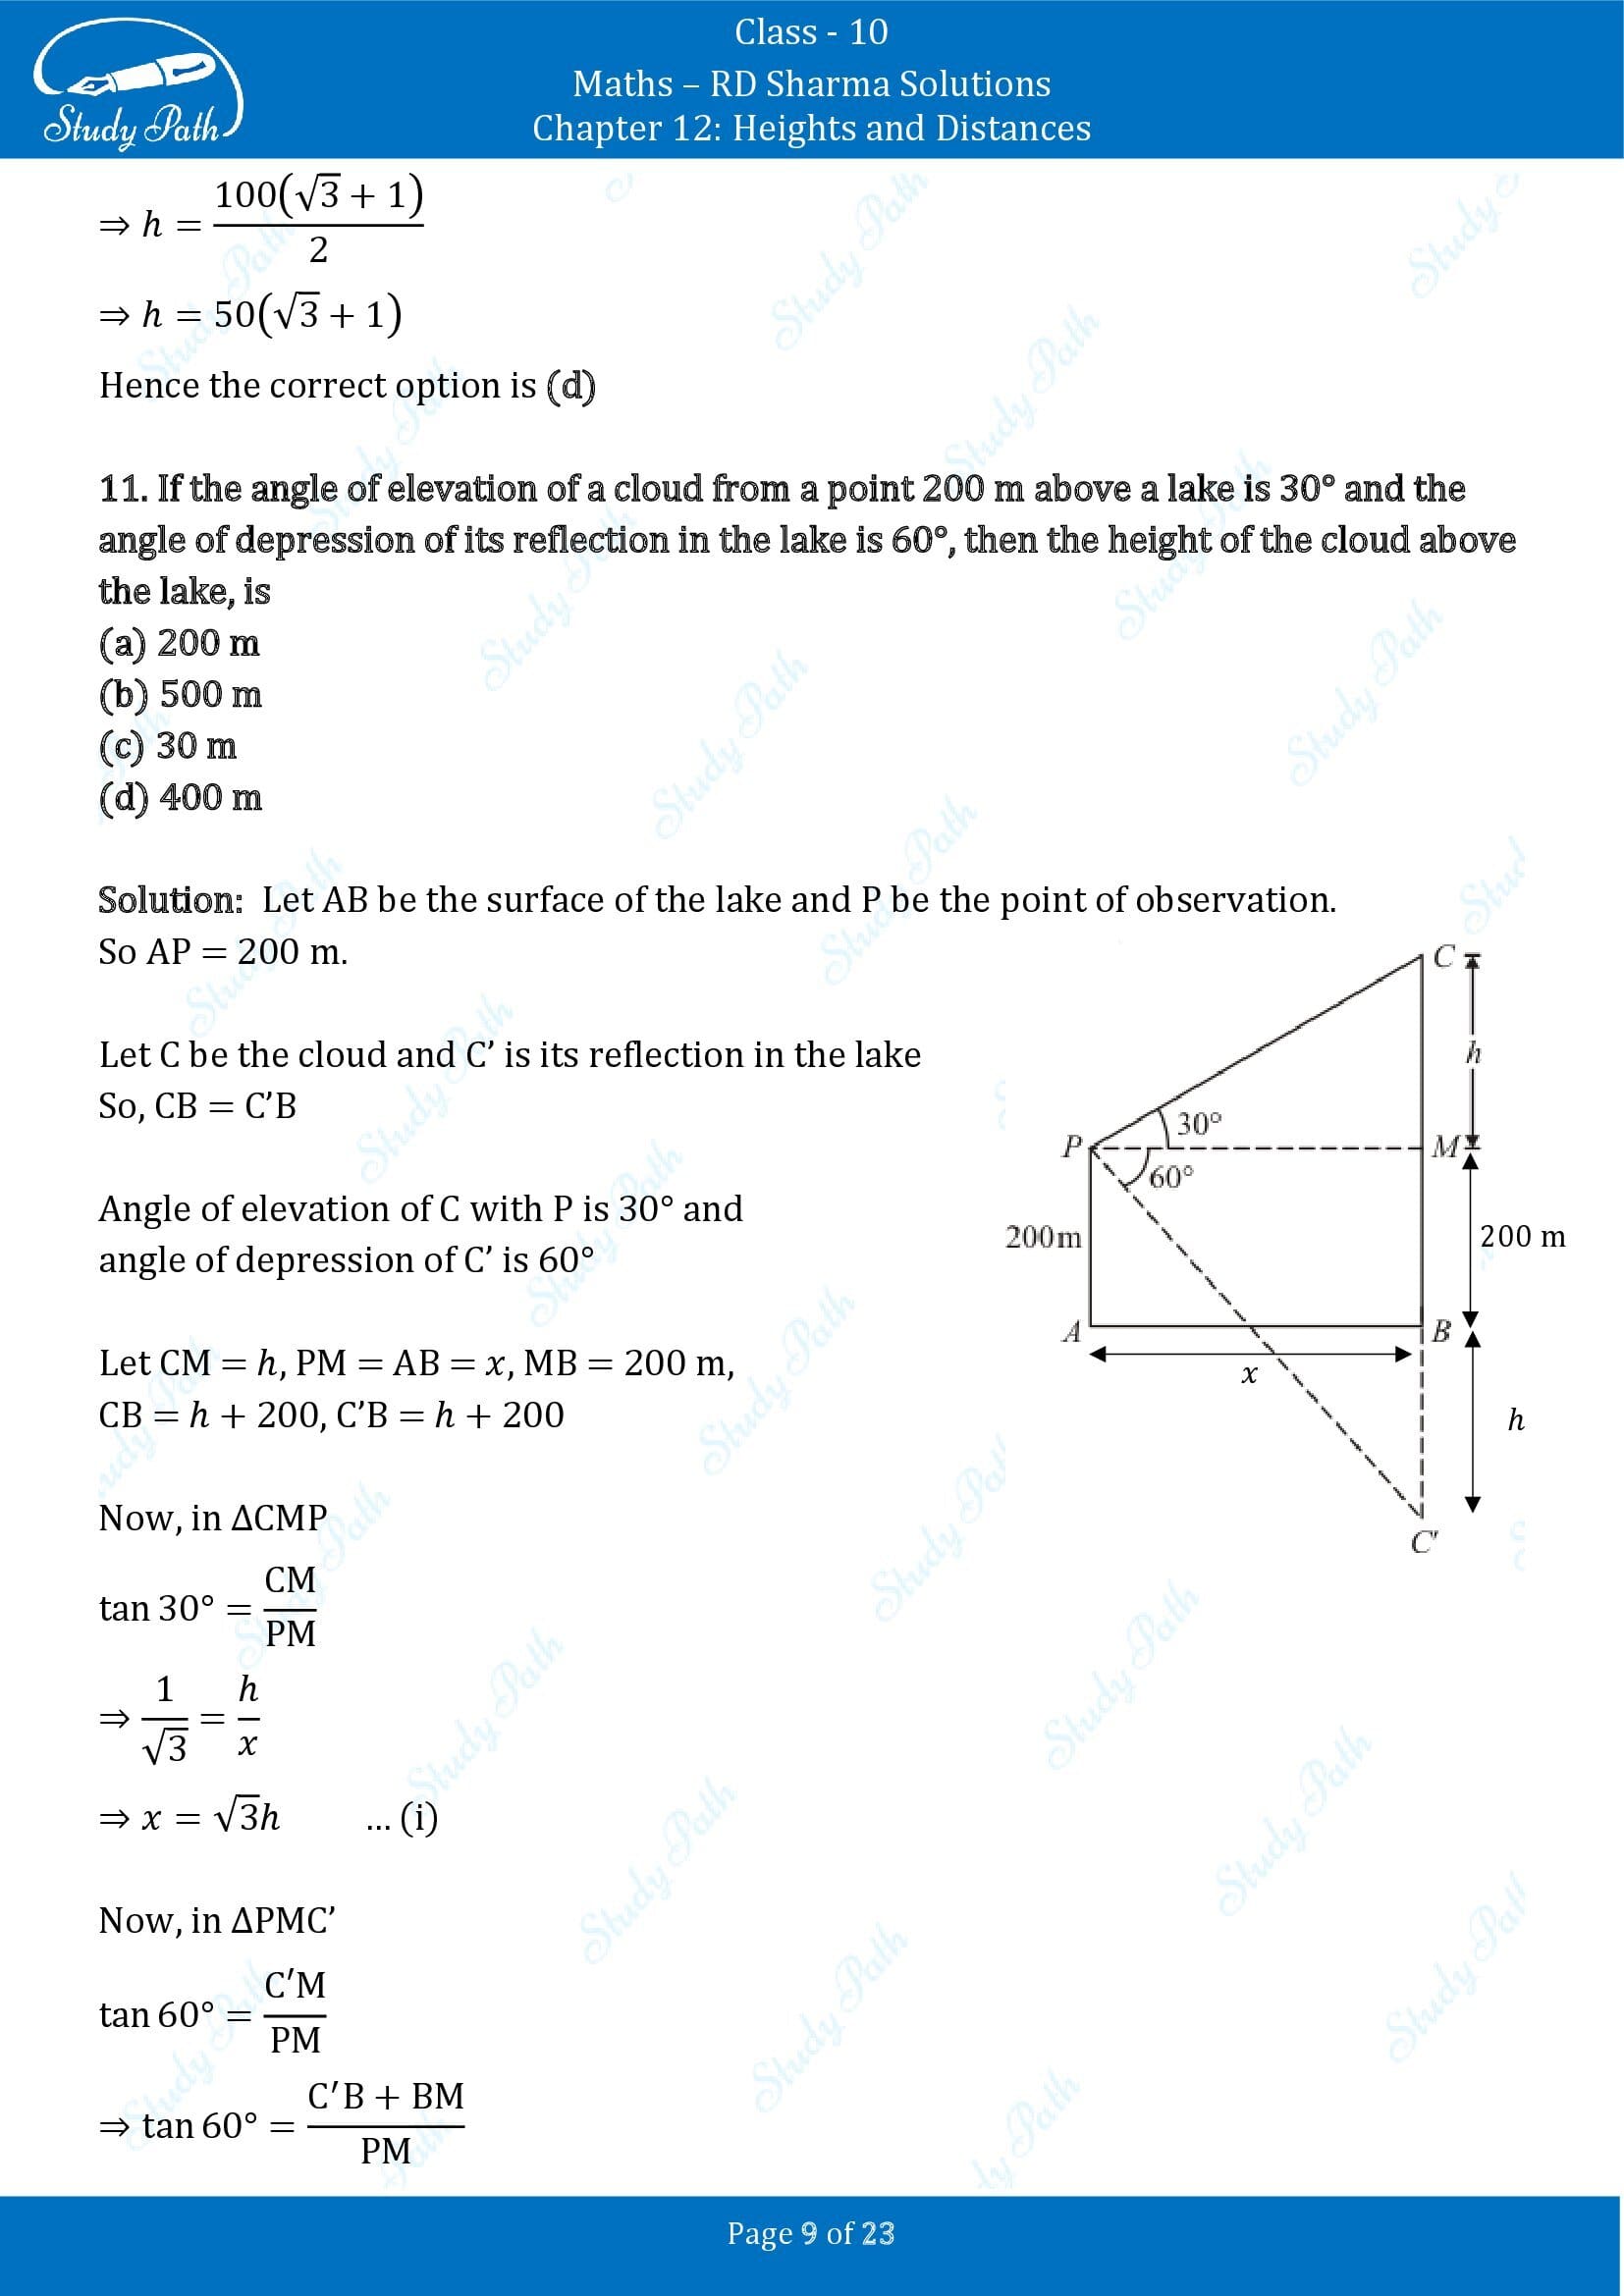 RD Sharma Solutions Class 10 Chapter 12 Heights and Distances Multiple Choice Question MCQs 00009